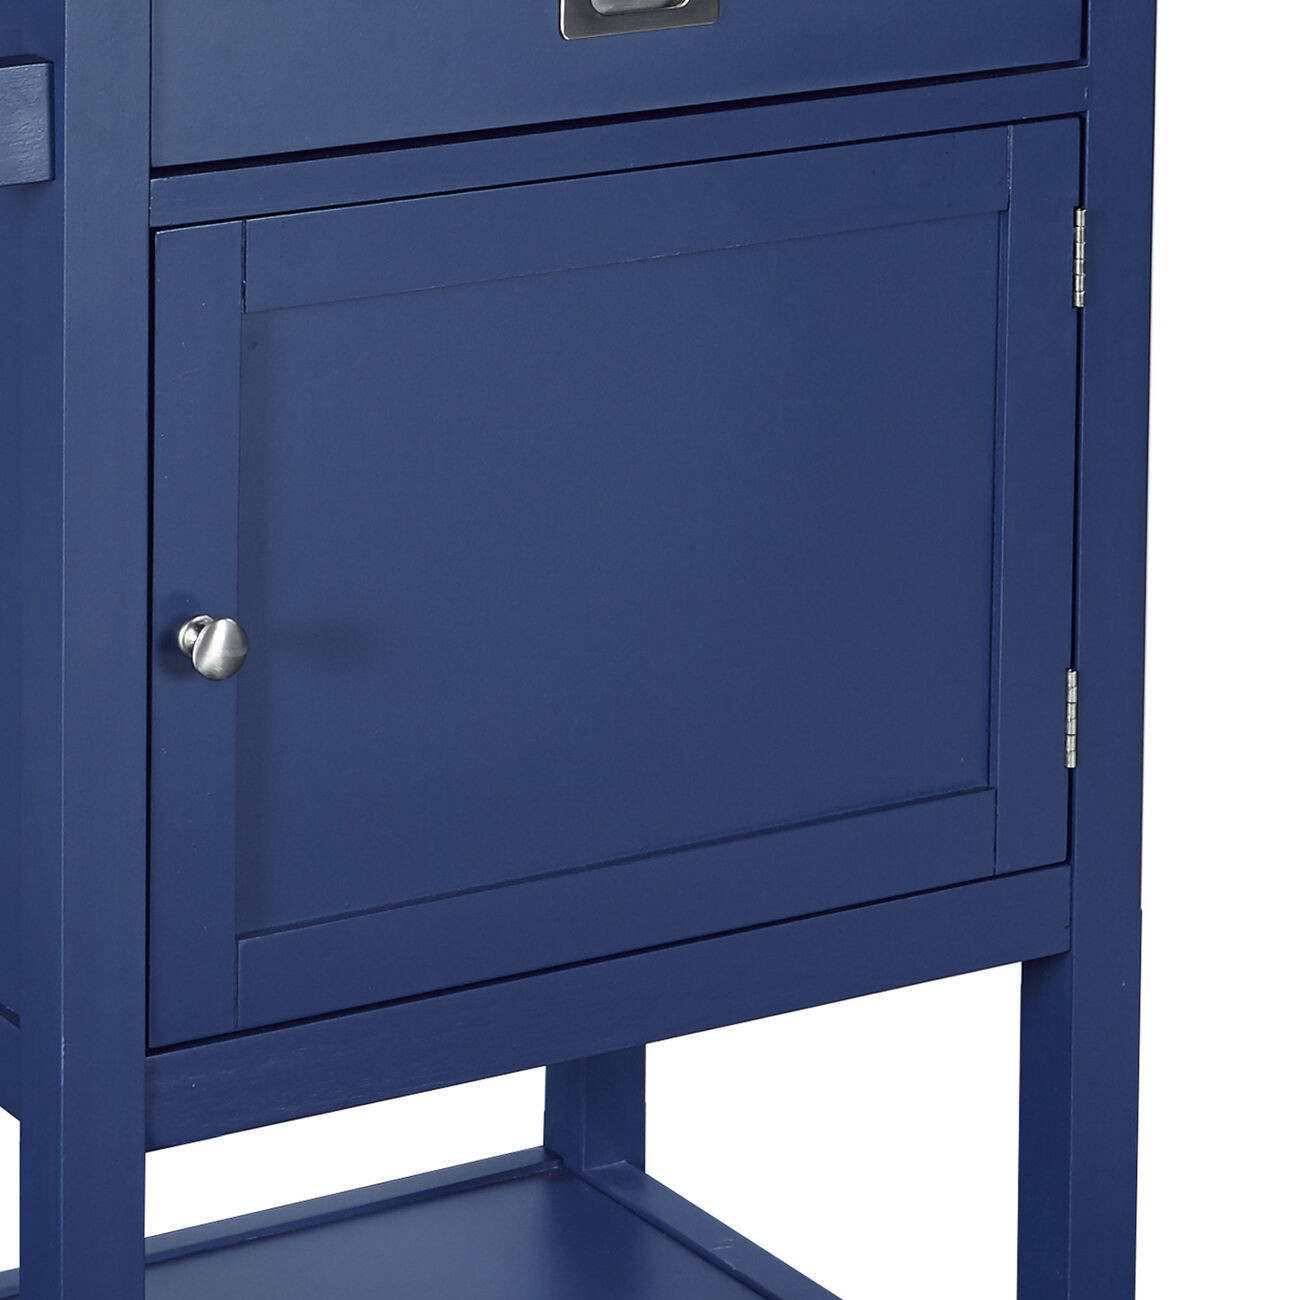 Contemporary Kitchen Cart with Stainless Steel Top and Casters, Blue